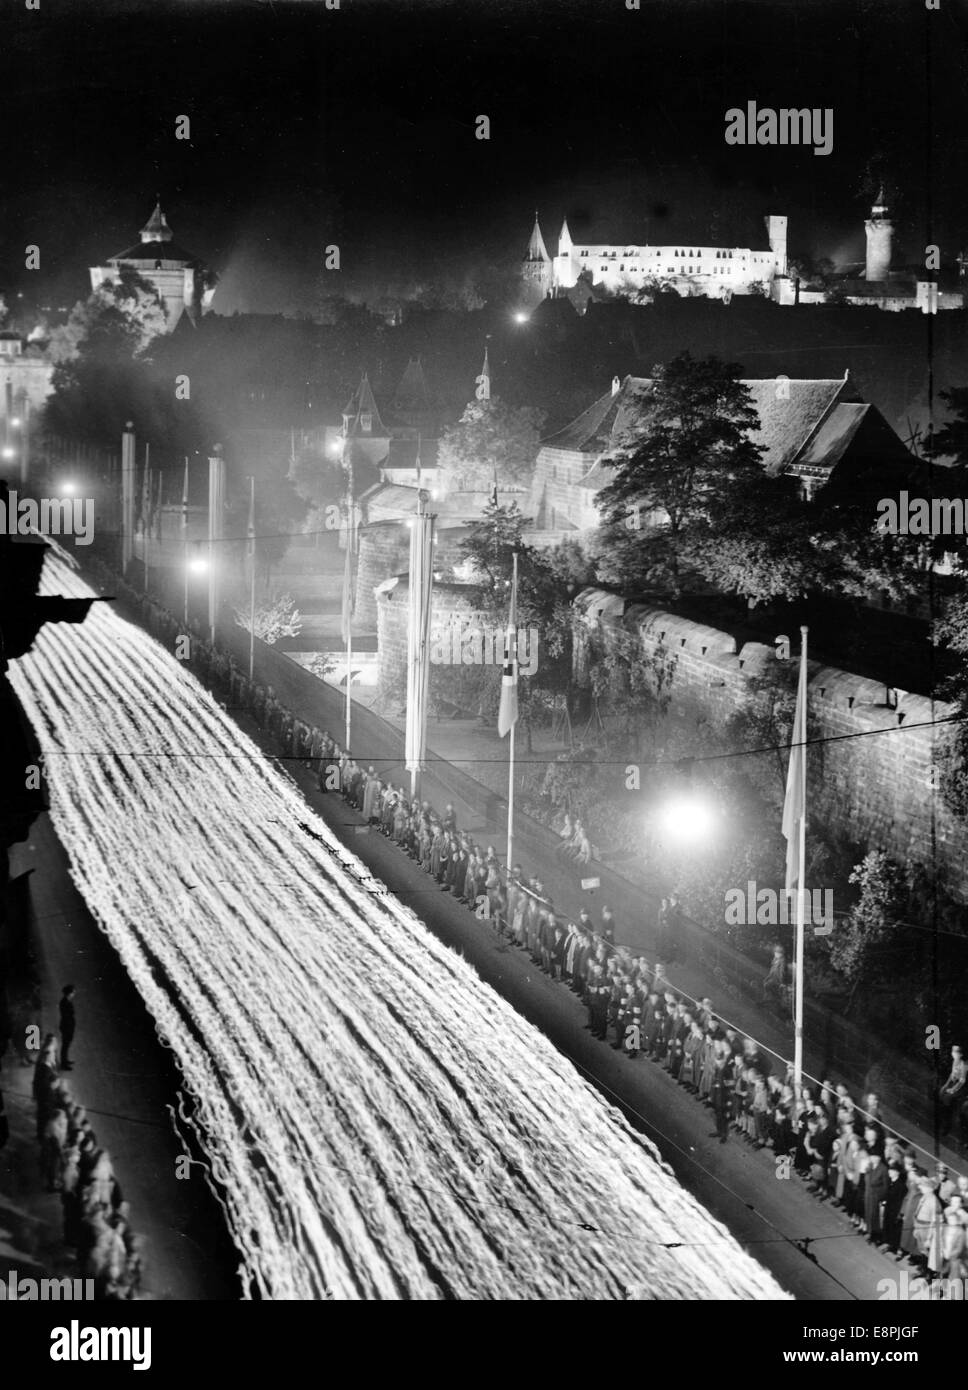 Nuremberg Rally 1938 in Nuremberg, Germany - Great torchlight procession of the political leaders at the Frauentormauer (lit: Women's Gate wall). (Flaws in quality due to the historic picture copy) Fotoarchiv für Zeitgeschichtee - NO WIRE SERVICE - Stock Photo